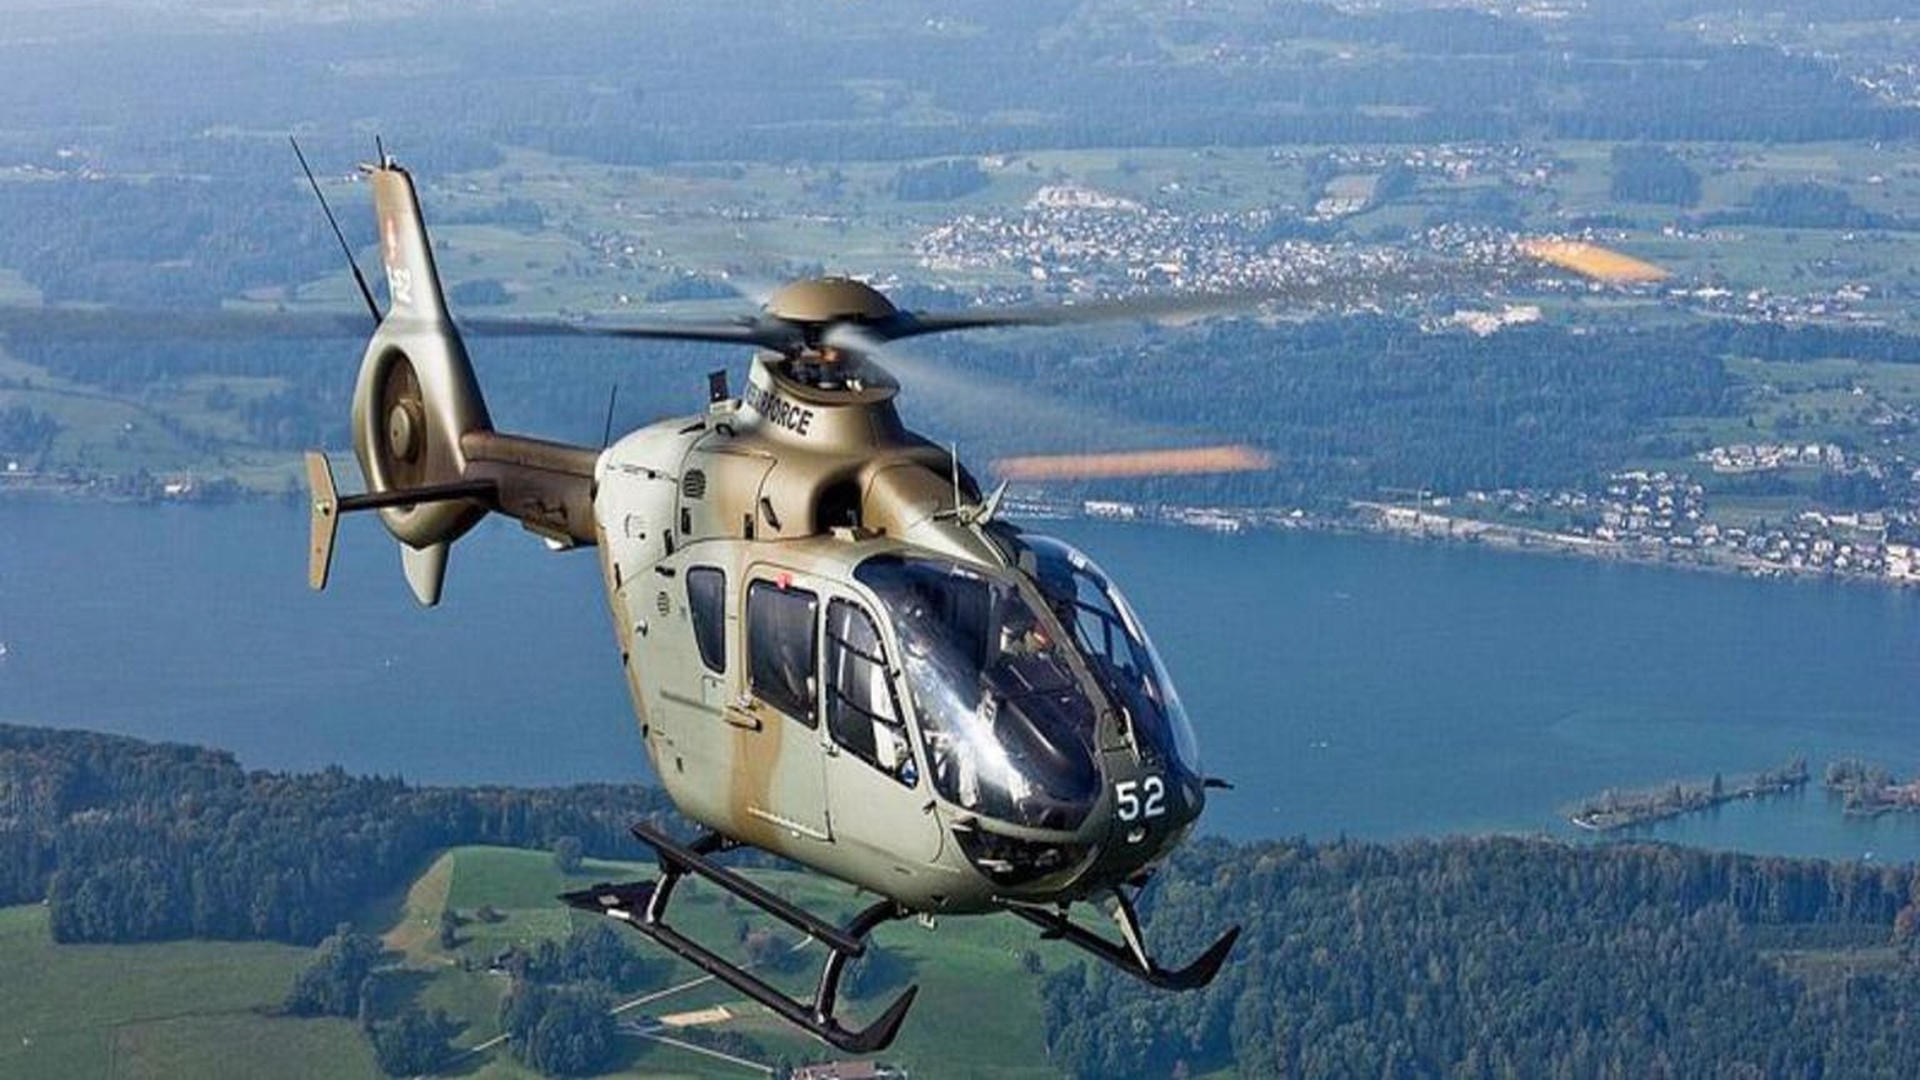 21 Stunning Helicopters Wallpapers Wallpaper Box